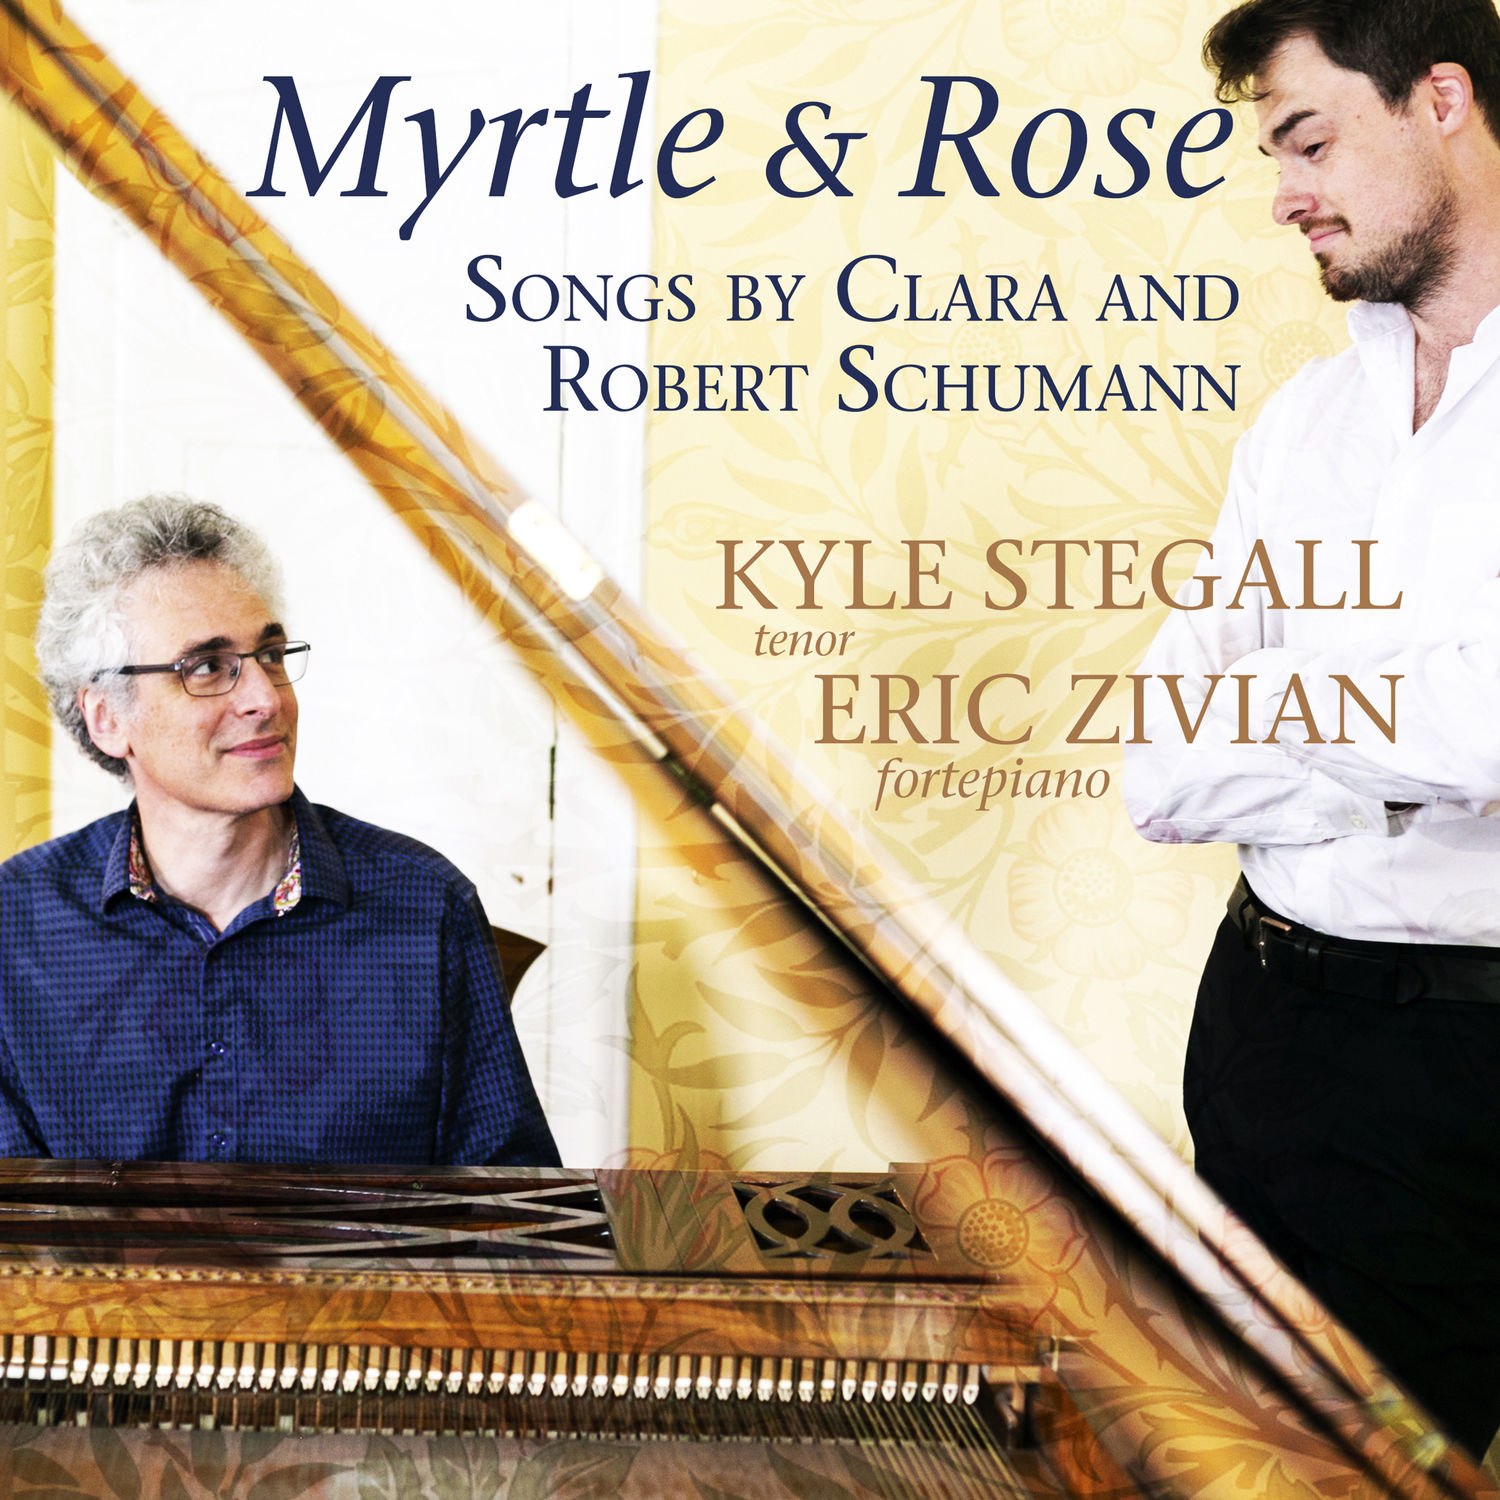 Kyle Stegall & Eric Zivian – Myrtle and Rose: Songs by Clara and Robert Schumann (2019) [FLAC 24bit/96kHz]